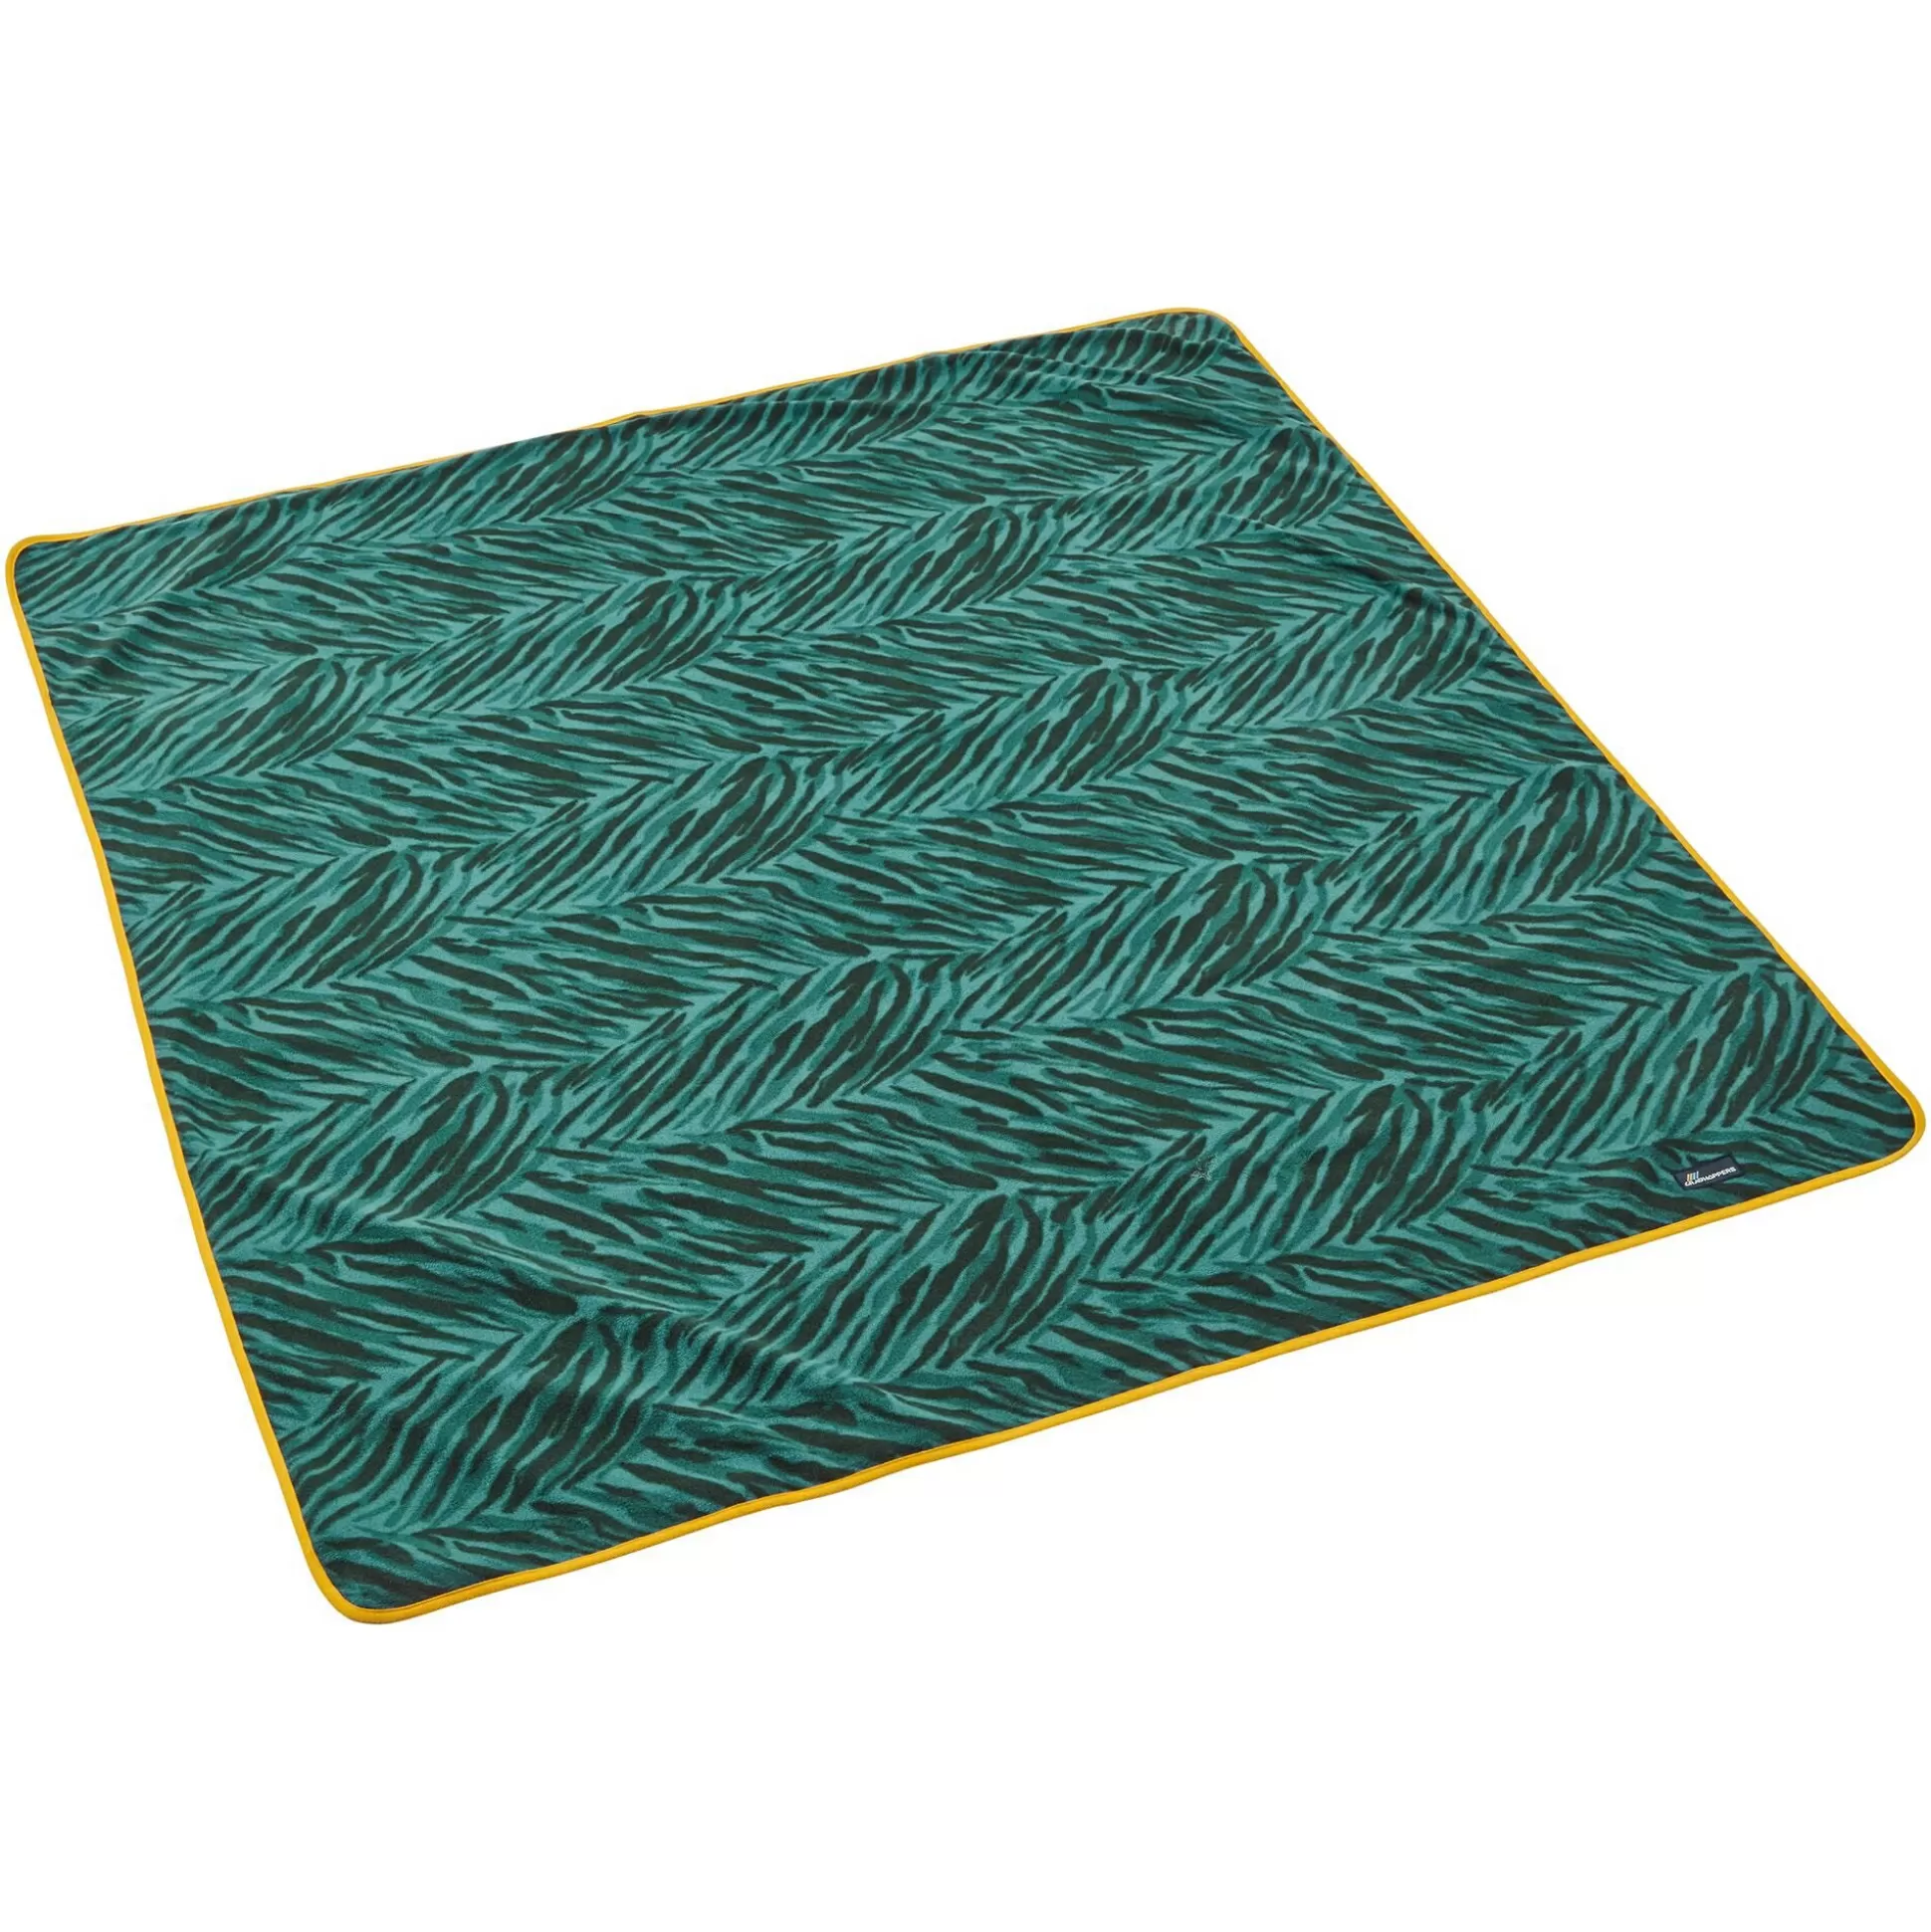 Craghoppers Picnic Blanket - Spruce Green< Camping Accessories